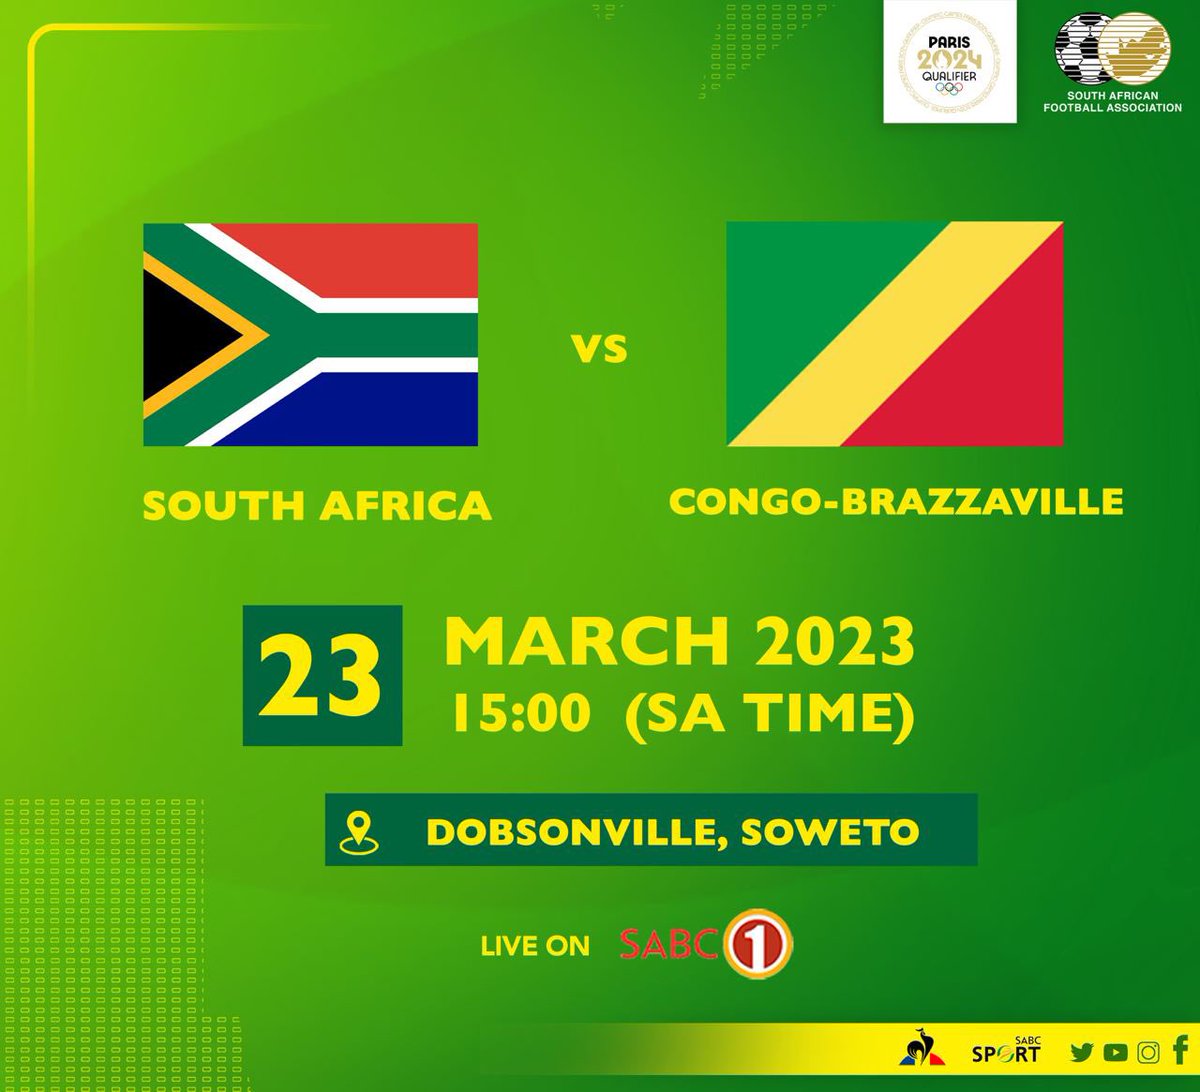 🚨U-23 MATCHDAY🚨 ⚽️South Africa vs Congo (Brazzaville) 🏆 CAF U23 Olympic Qualifiers 📆 TODAY, 23 March 2023 🏟️ Dobsonville stadium 🕒 15:00pm 📺 @Official_SABC1 LET’S GO!!!💪🏽💚💛🇿🇦